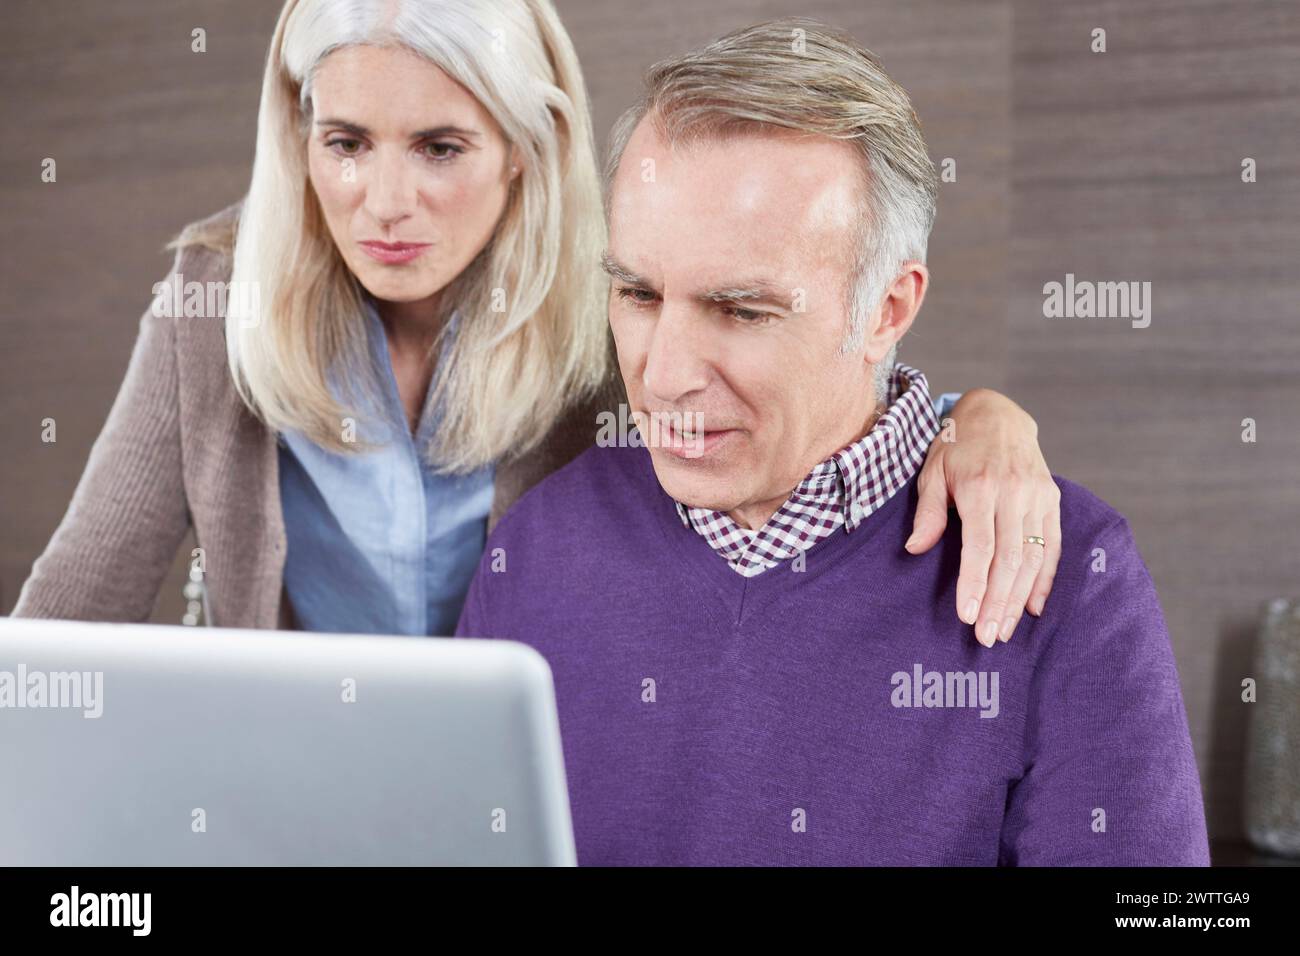 Two adults looking at a laptop screen Stock Photo